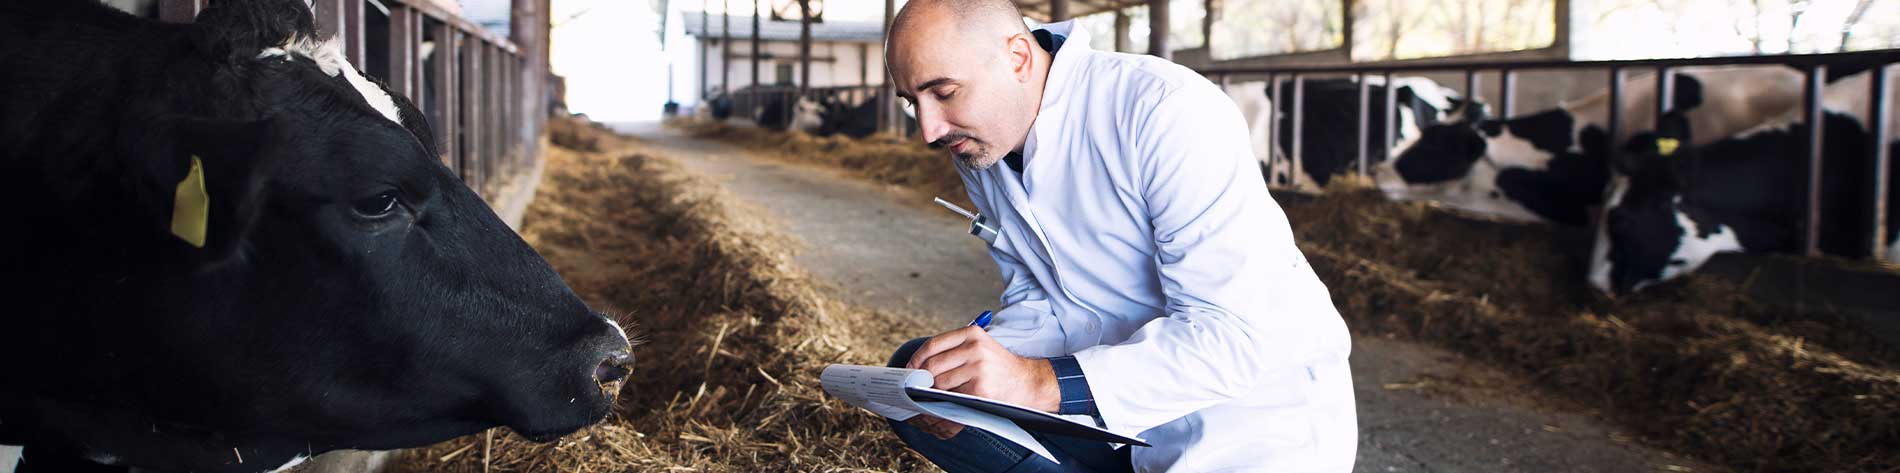 Man in white coat with clipboard checking the health of a cow in a shed.